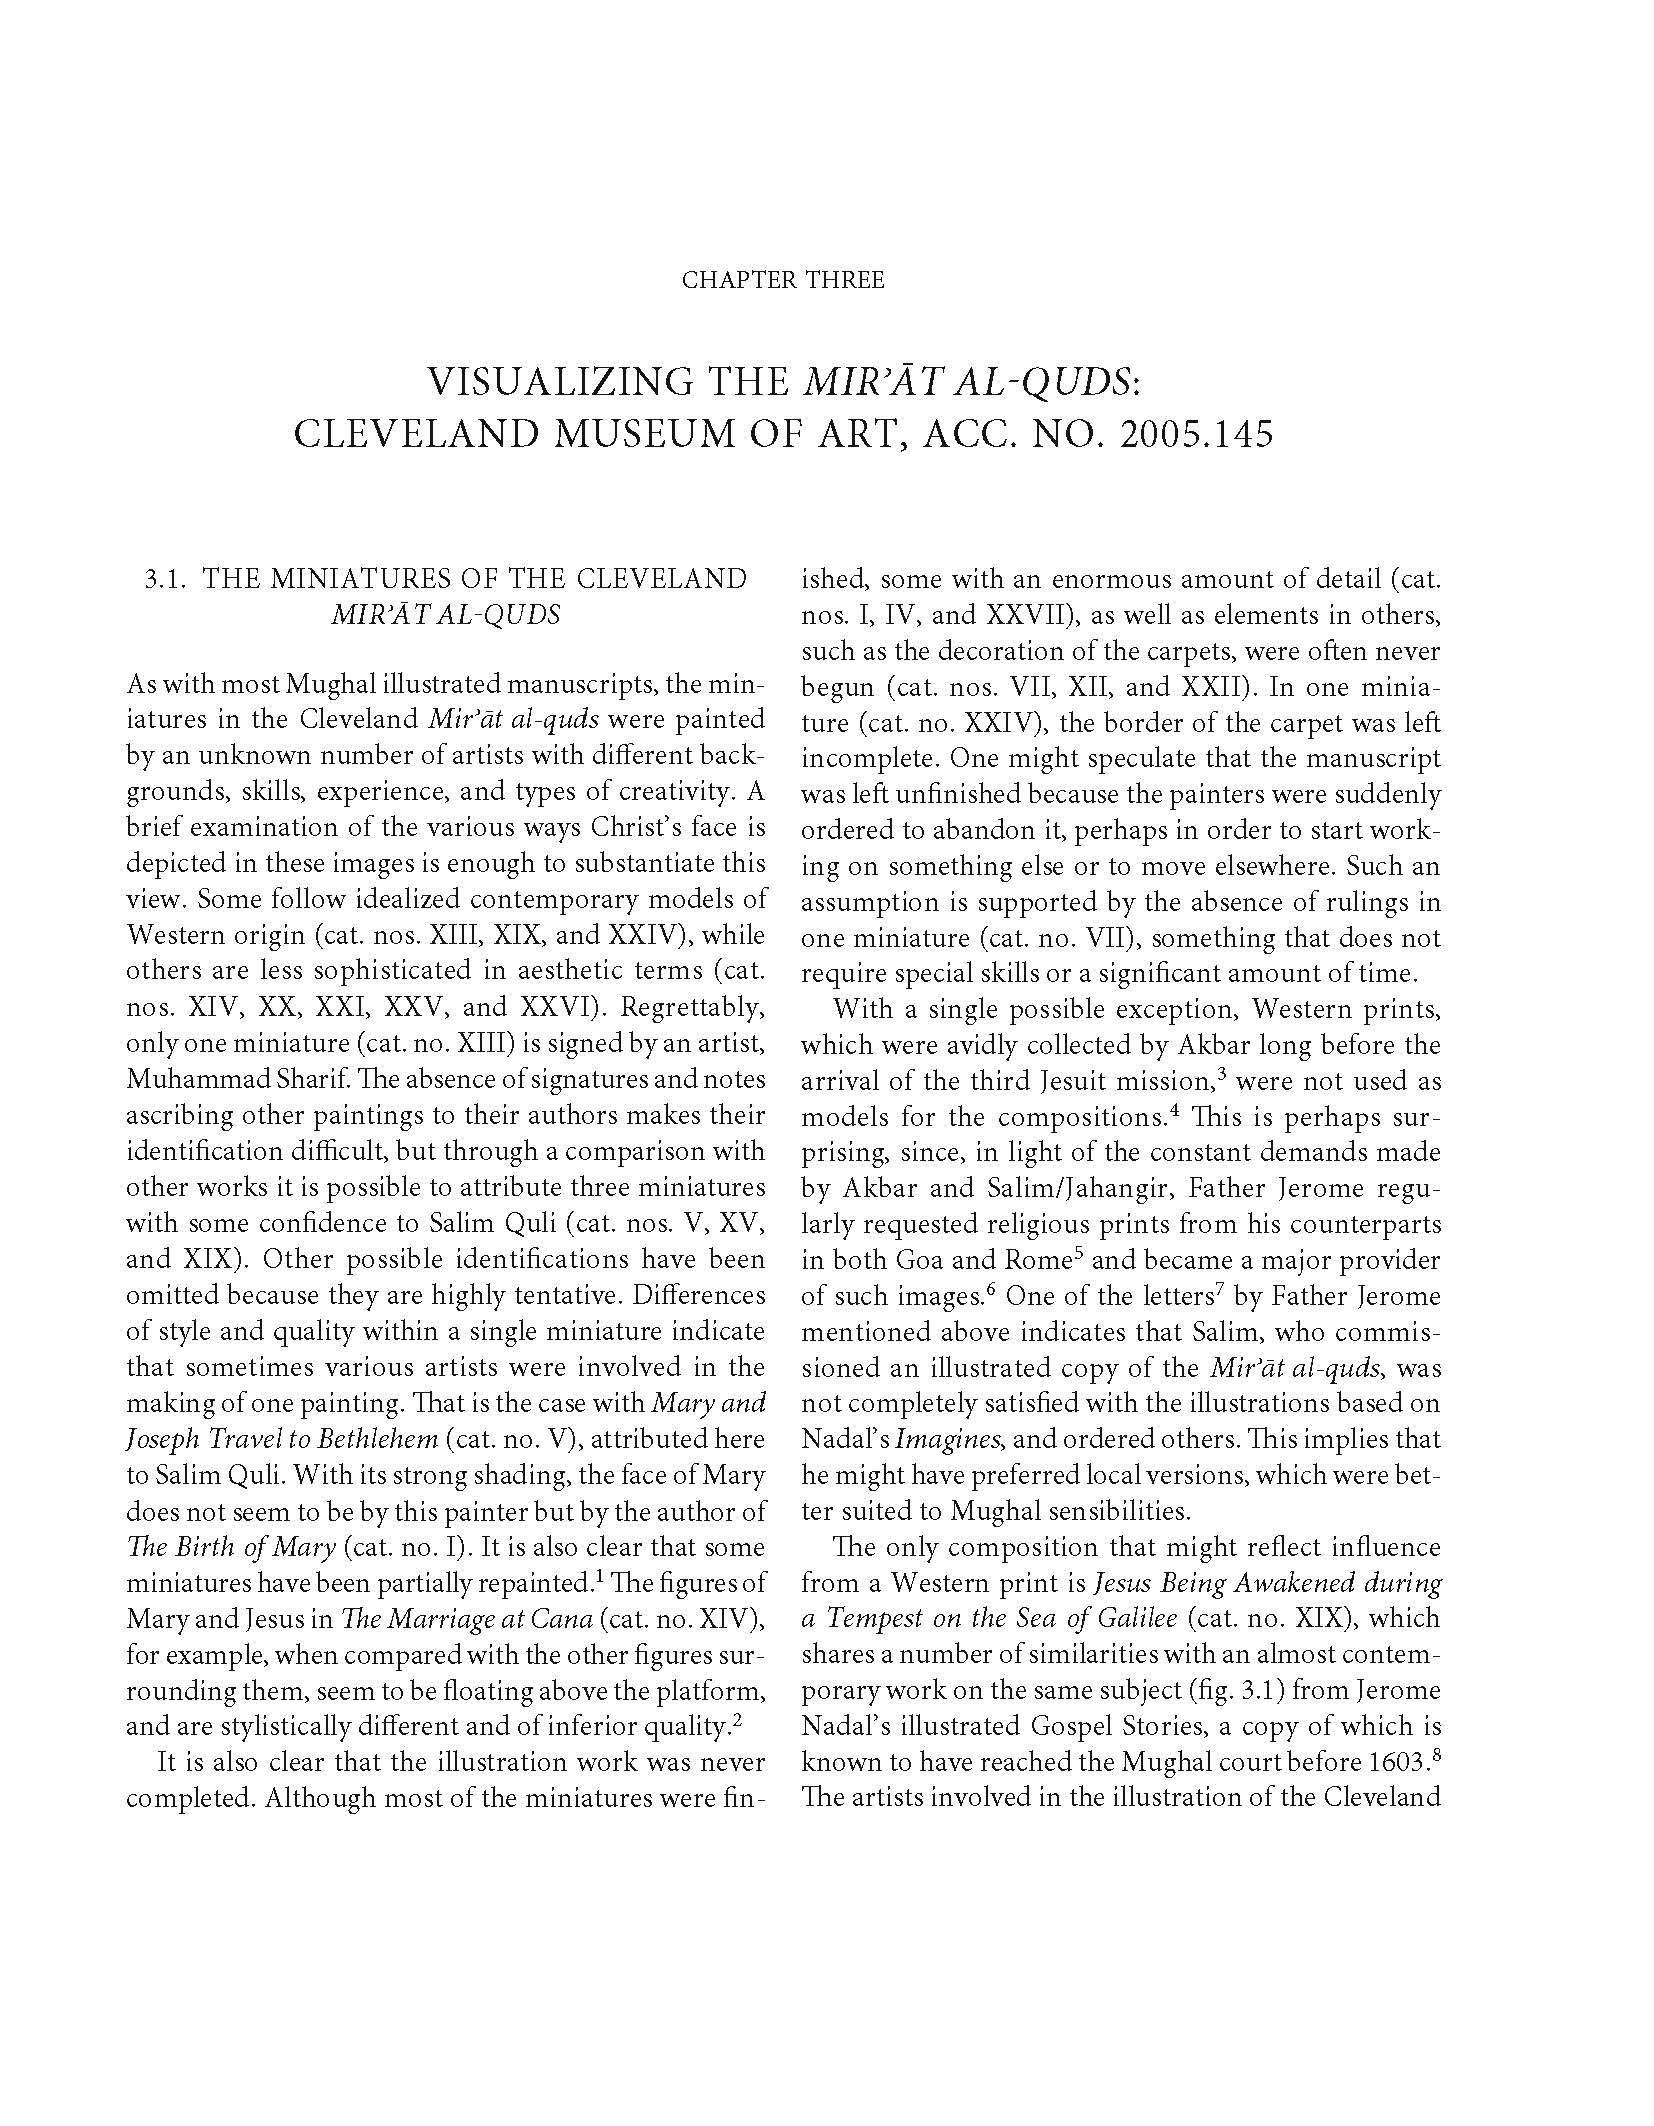 Pedro Moura Carvalho - Chapter Three of&nbsp;<span style="font-style: italic;">Mir’āt al-quds (Mirror of Holiness): A Life of Christ for Emperor Akbar.&nbsp;</span>This study examines the&nbsp;<span style="font-style: italic;">Mir'at al-Quds (Mirror of Holiness)</span>, an account of the life of Christ written by a Jesuit missionary to the court of Mughal Emperor Akbar, who took an interest in Christianity. Three illustrated copies exist, the most important of which is in the Cleveland Museum of Art and forms the basis of this study. The text, originally in Persian, is translated to English for the first time by Wheeler M. Thackston. Chapter Three examines the copy of <span style="font-style: italic;">Mir'at al-Quds</span>&nbsp;housed in the Cleveland Museum of Art (Acc. No. 2004.145). This study is part of the series&nbsp;<span style="font-style: italic;">Studies and Sources on Islamic Art and Architecture: Supplements to Muqarnas</span>, Volume XII.